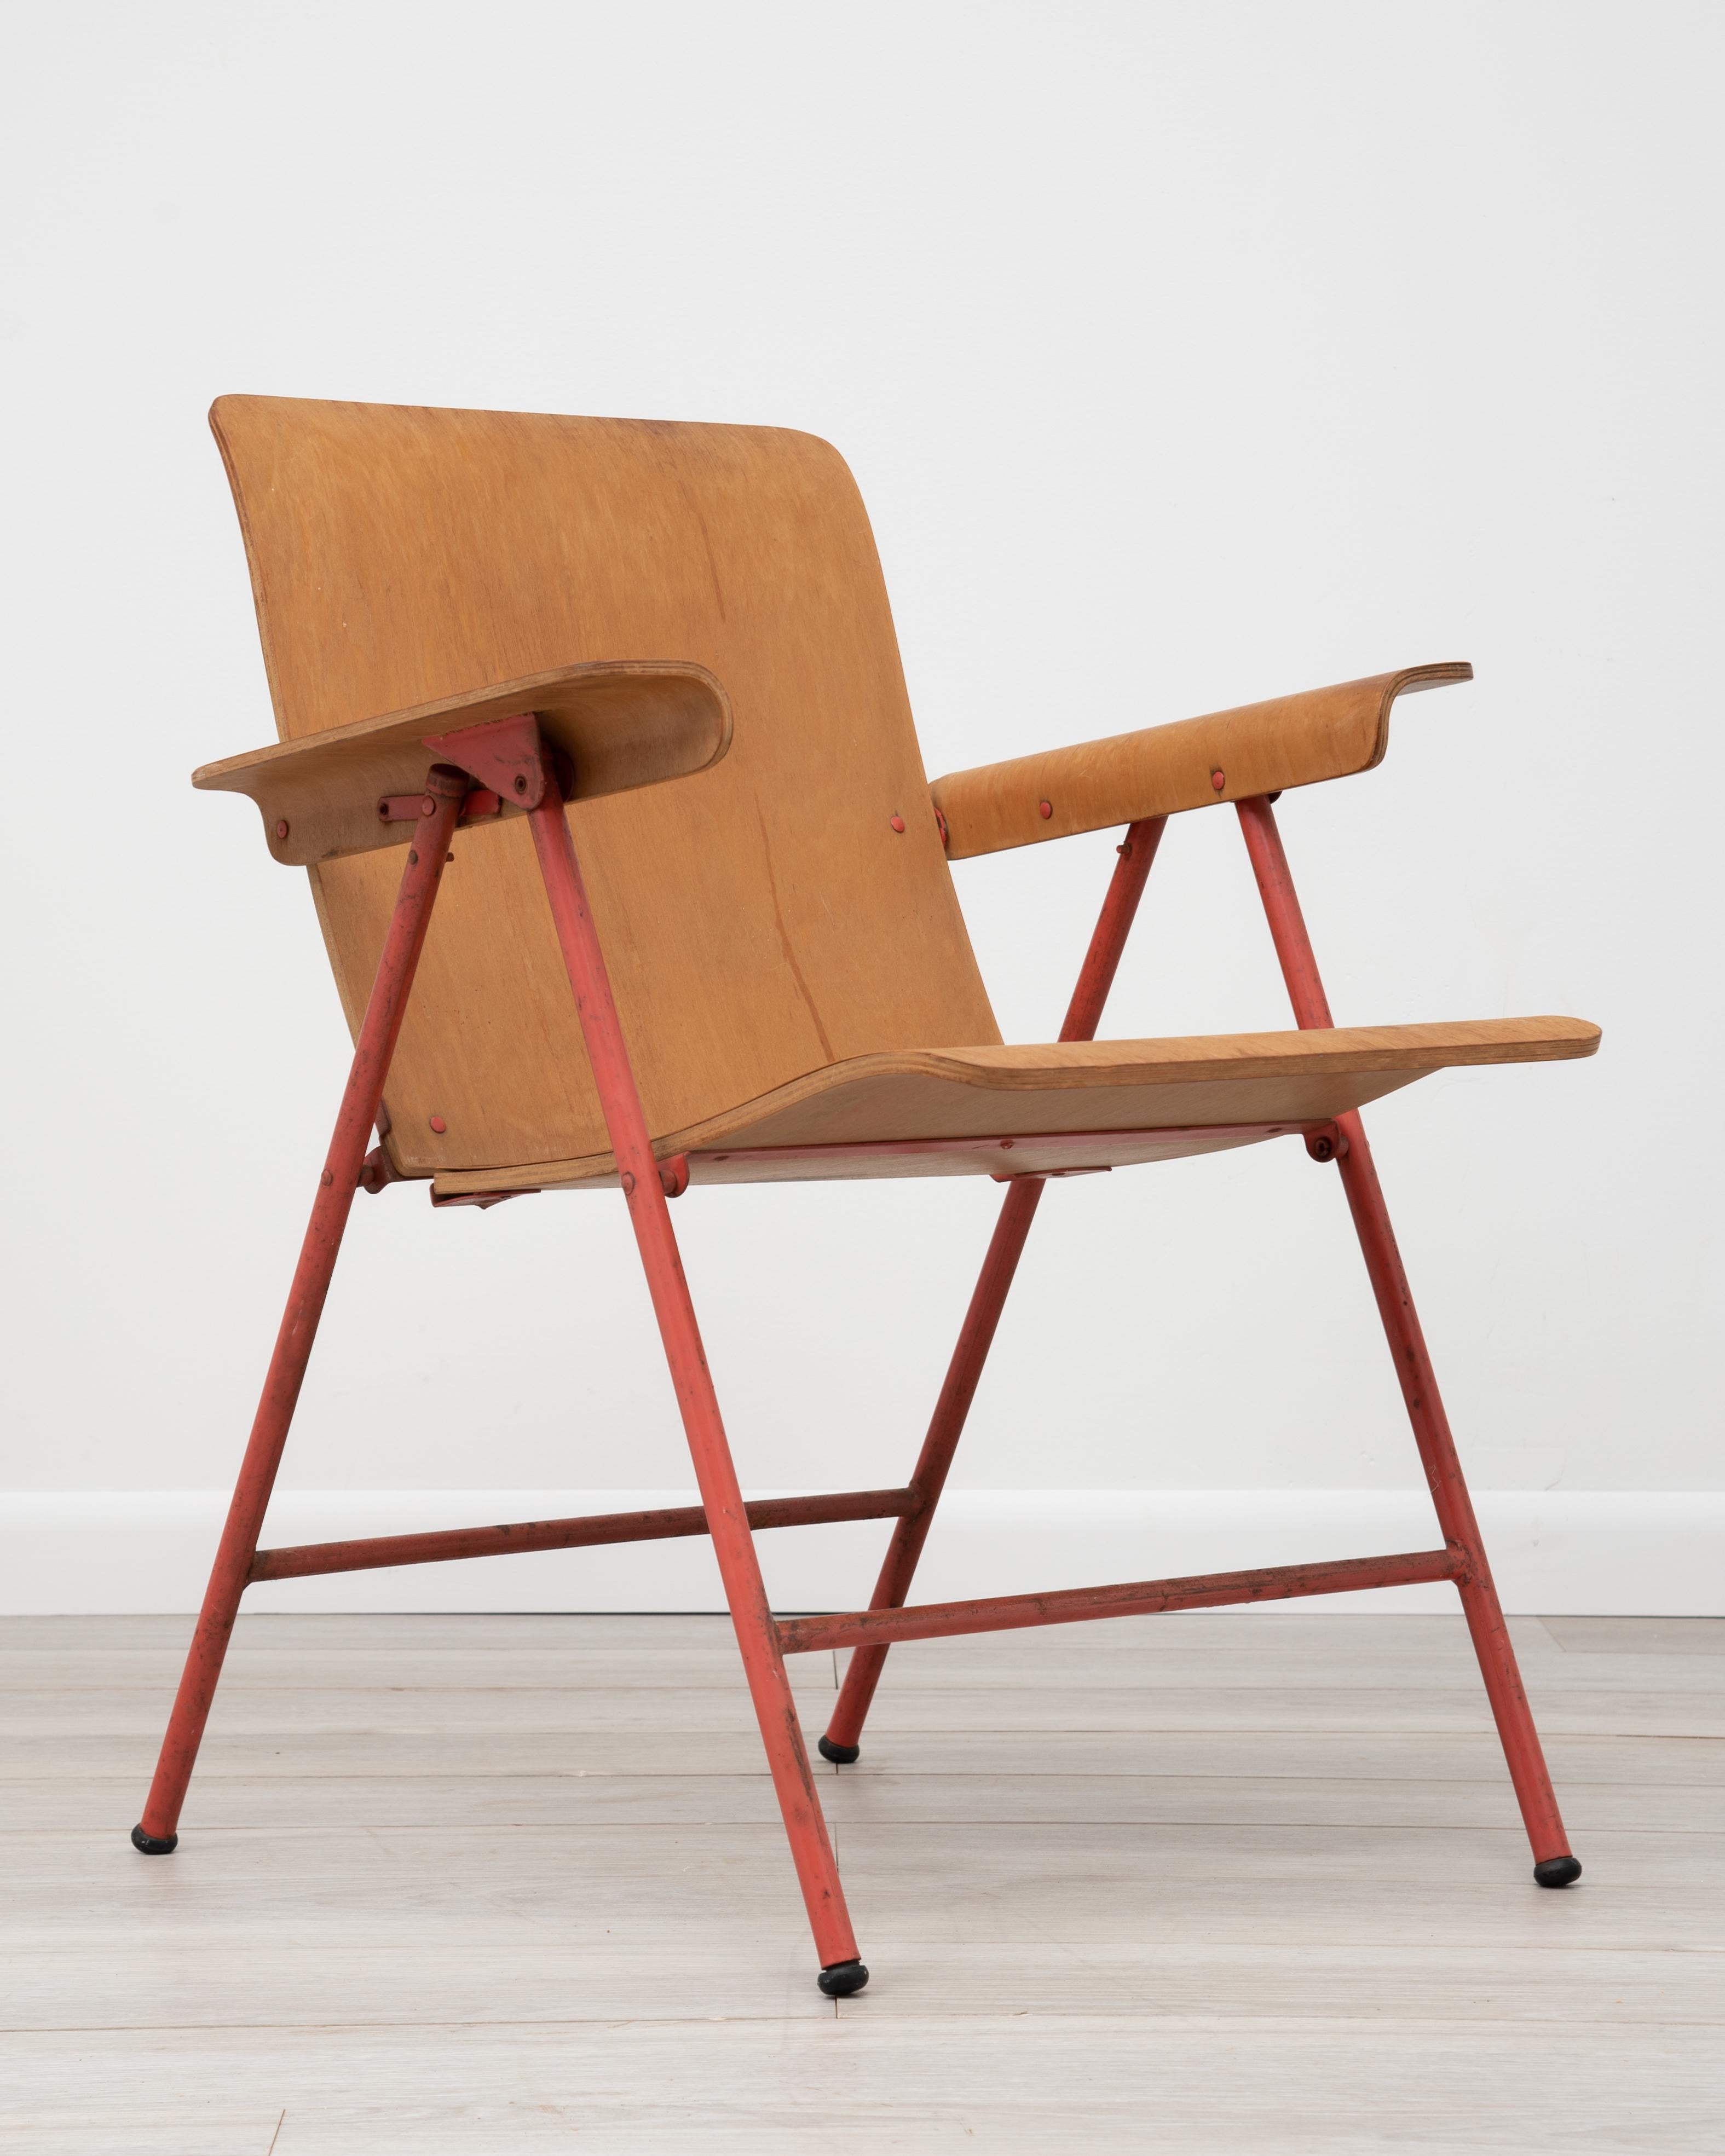 American Samson Folding Chair Russel Wright Shwayder Bros Inc. 1950s For Sale